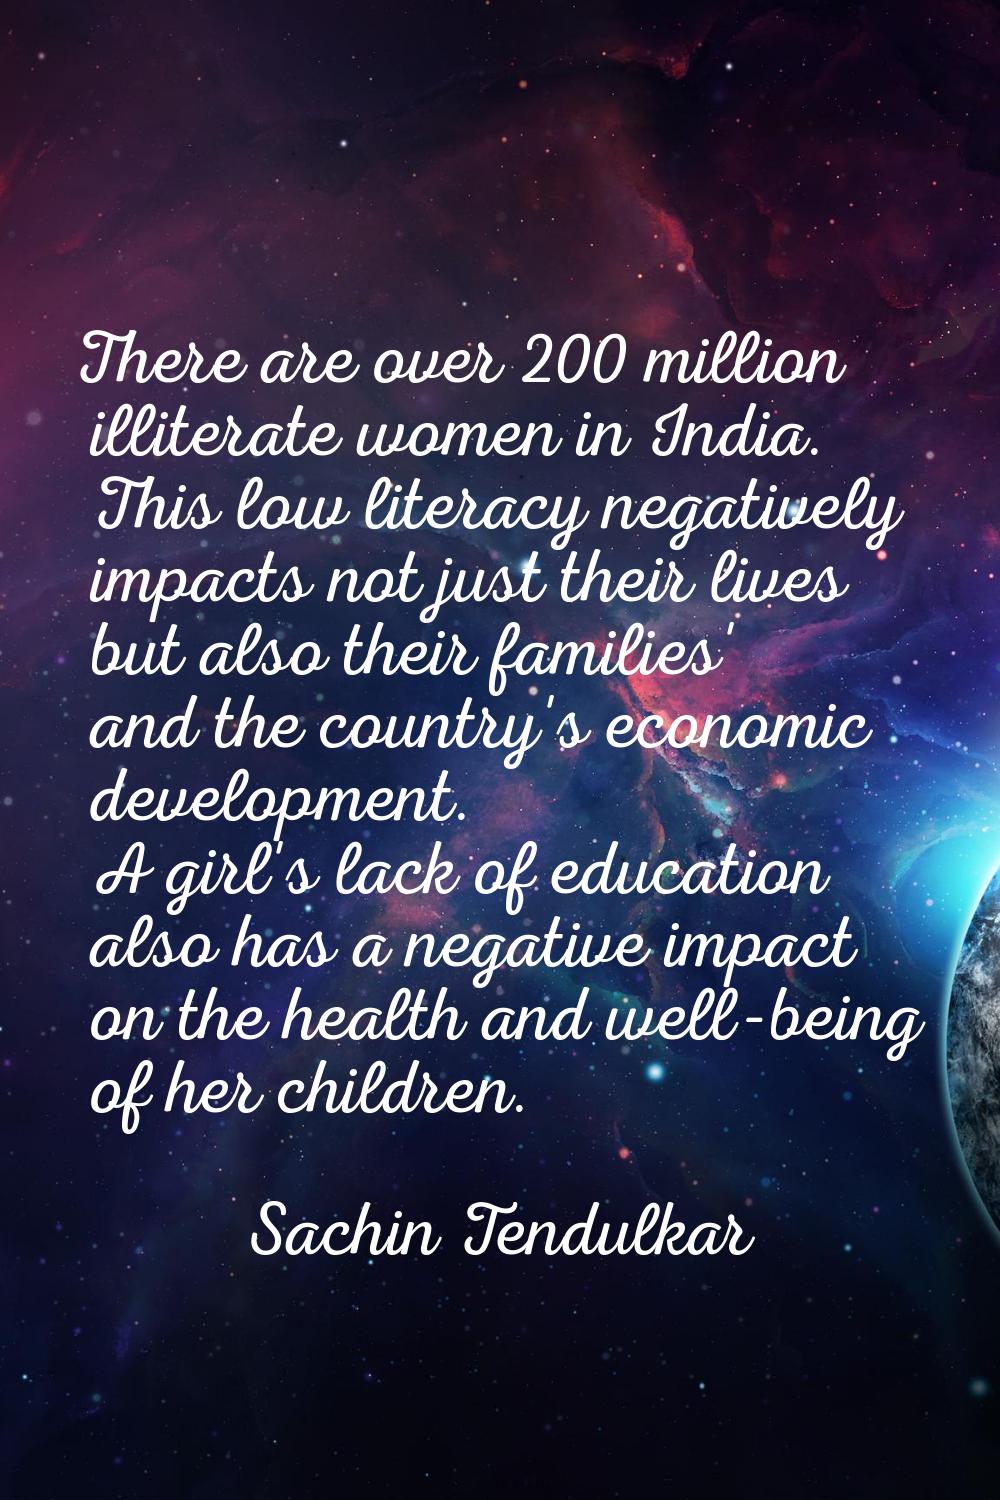 There are over 200 million illiterate women in India. This low literacy negatively impacts not just